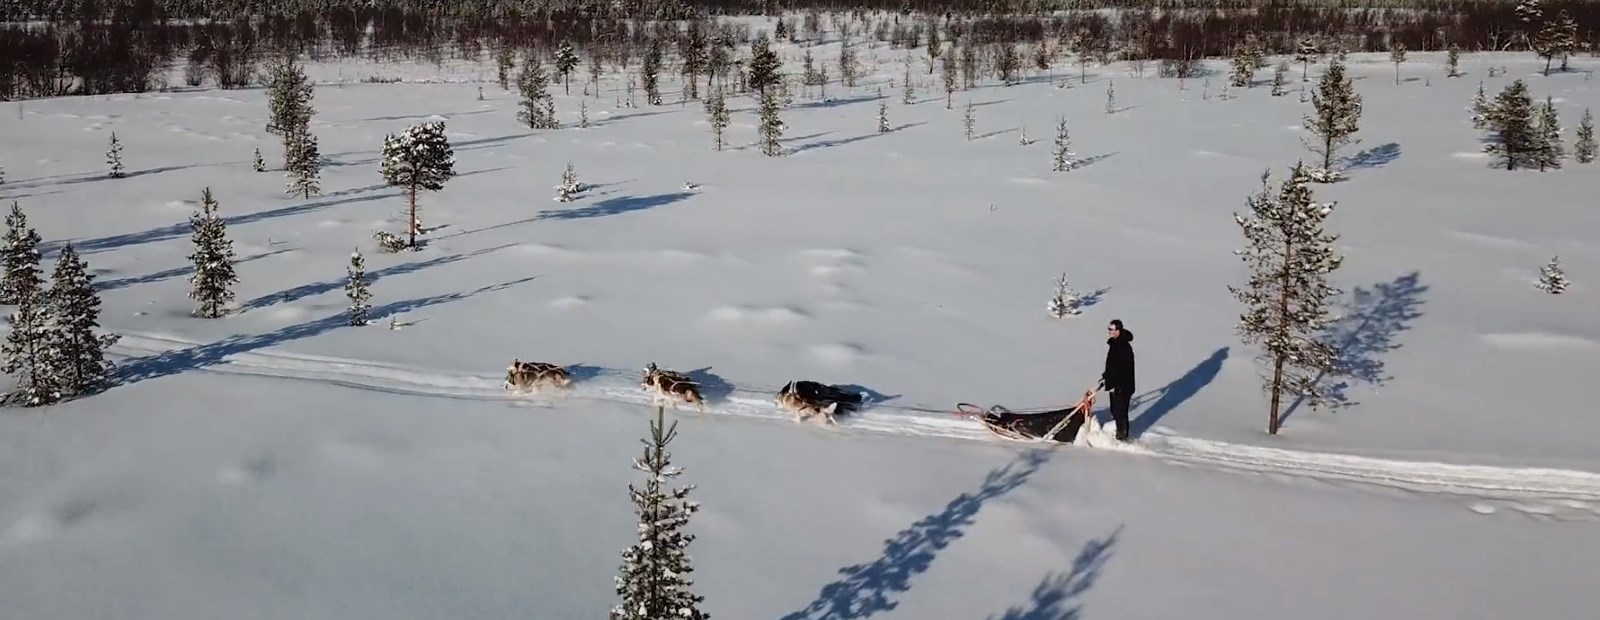 Video: Dog Sledding at the Top of the World